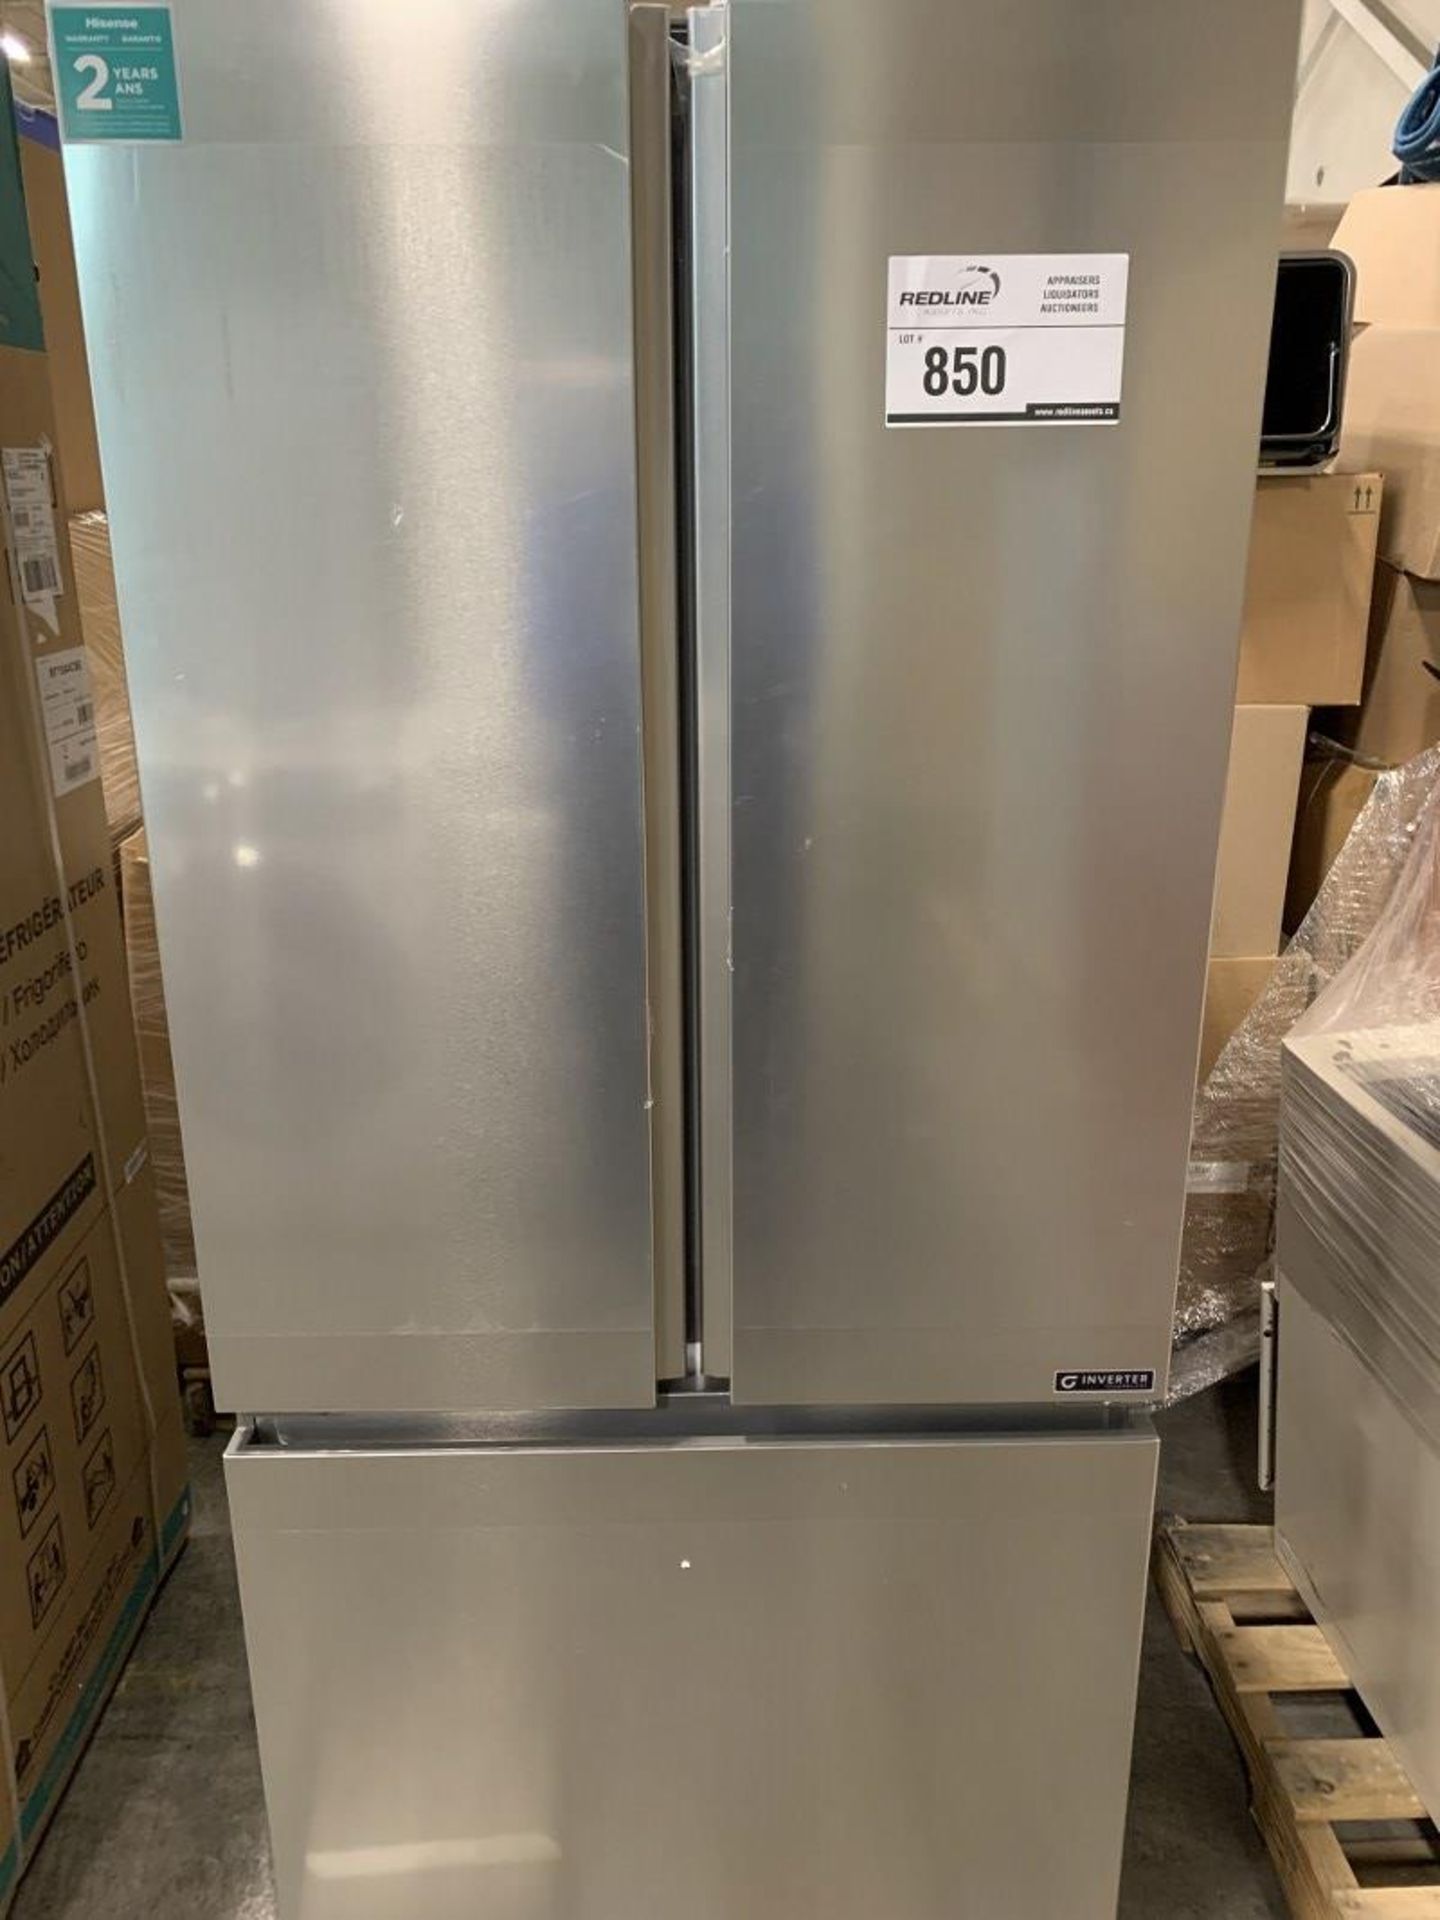 Hisense - 30In 20.8 Cu Ft. Stainless Steel French Door Refrigerator With Full Width Adjustable